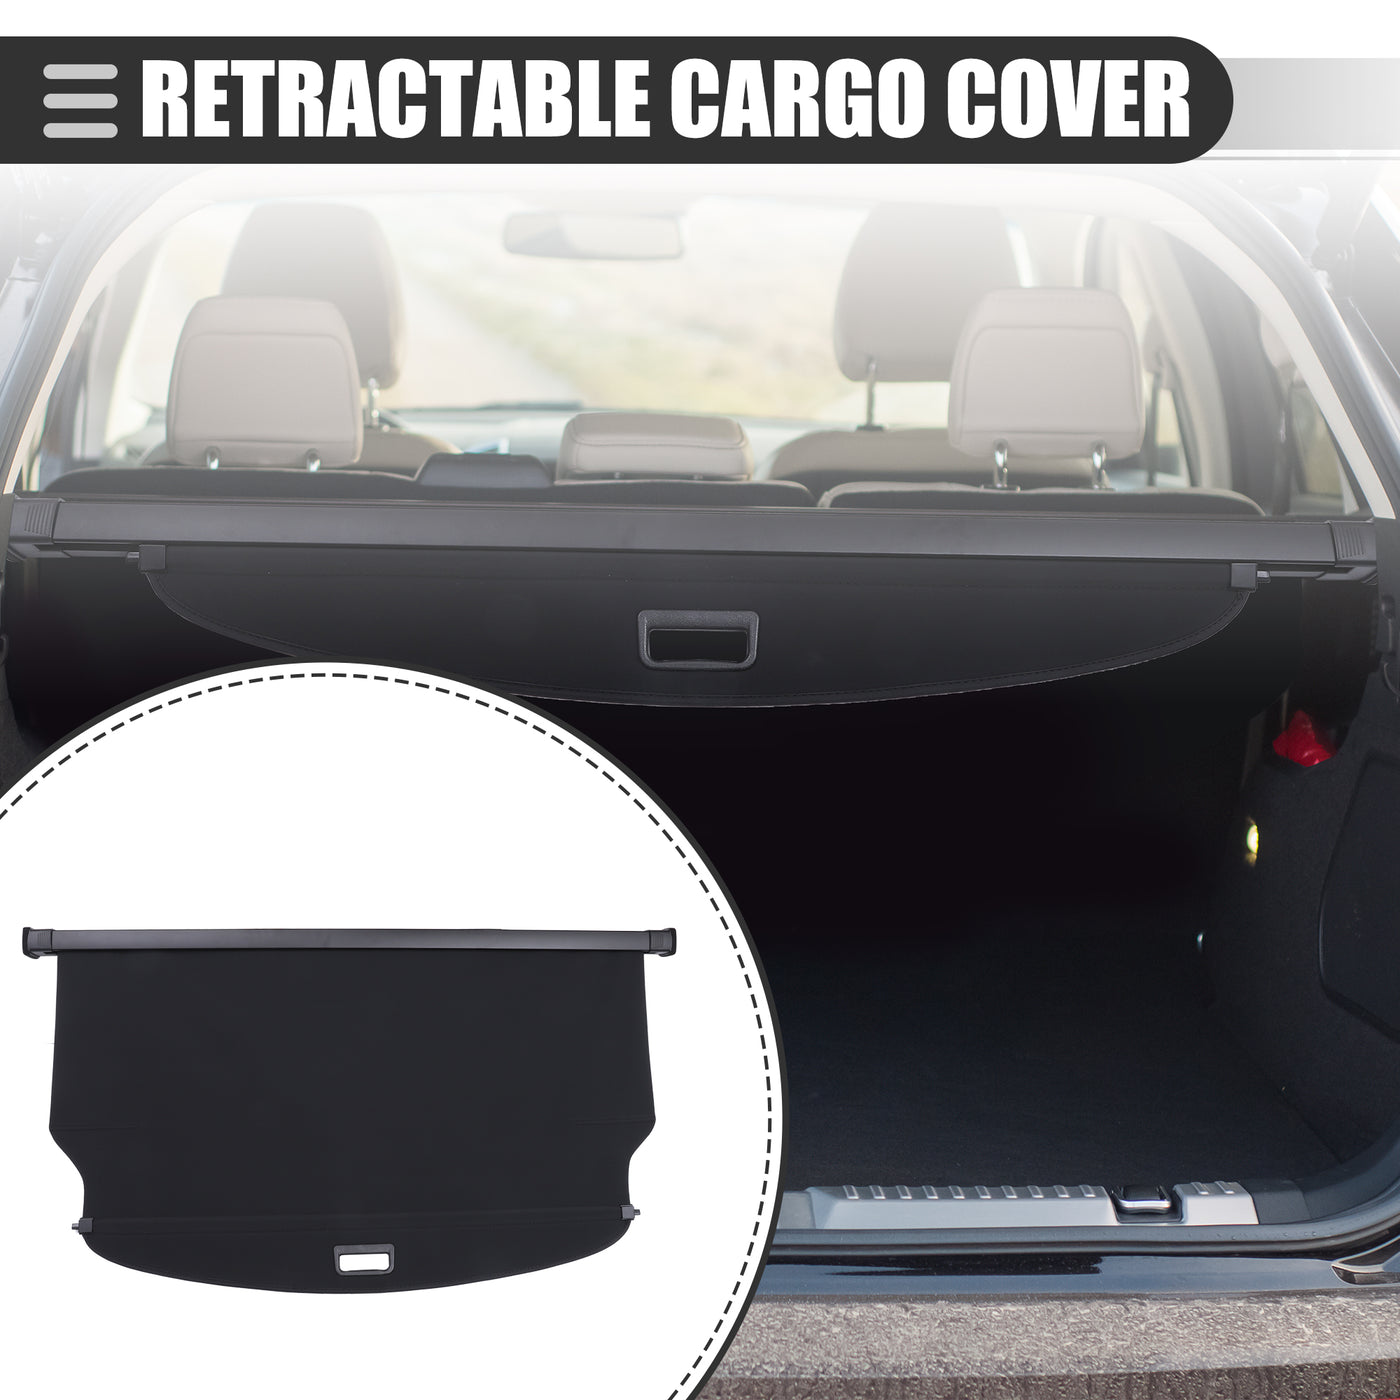 Motoforti Retractable Cargo Cover, Heat Resistant Rear Trunk Security Cover Shield Shade, for Hyundai Tucson 2016 2017 2018 2019 2020 2021, Waterproof Canvas, Black